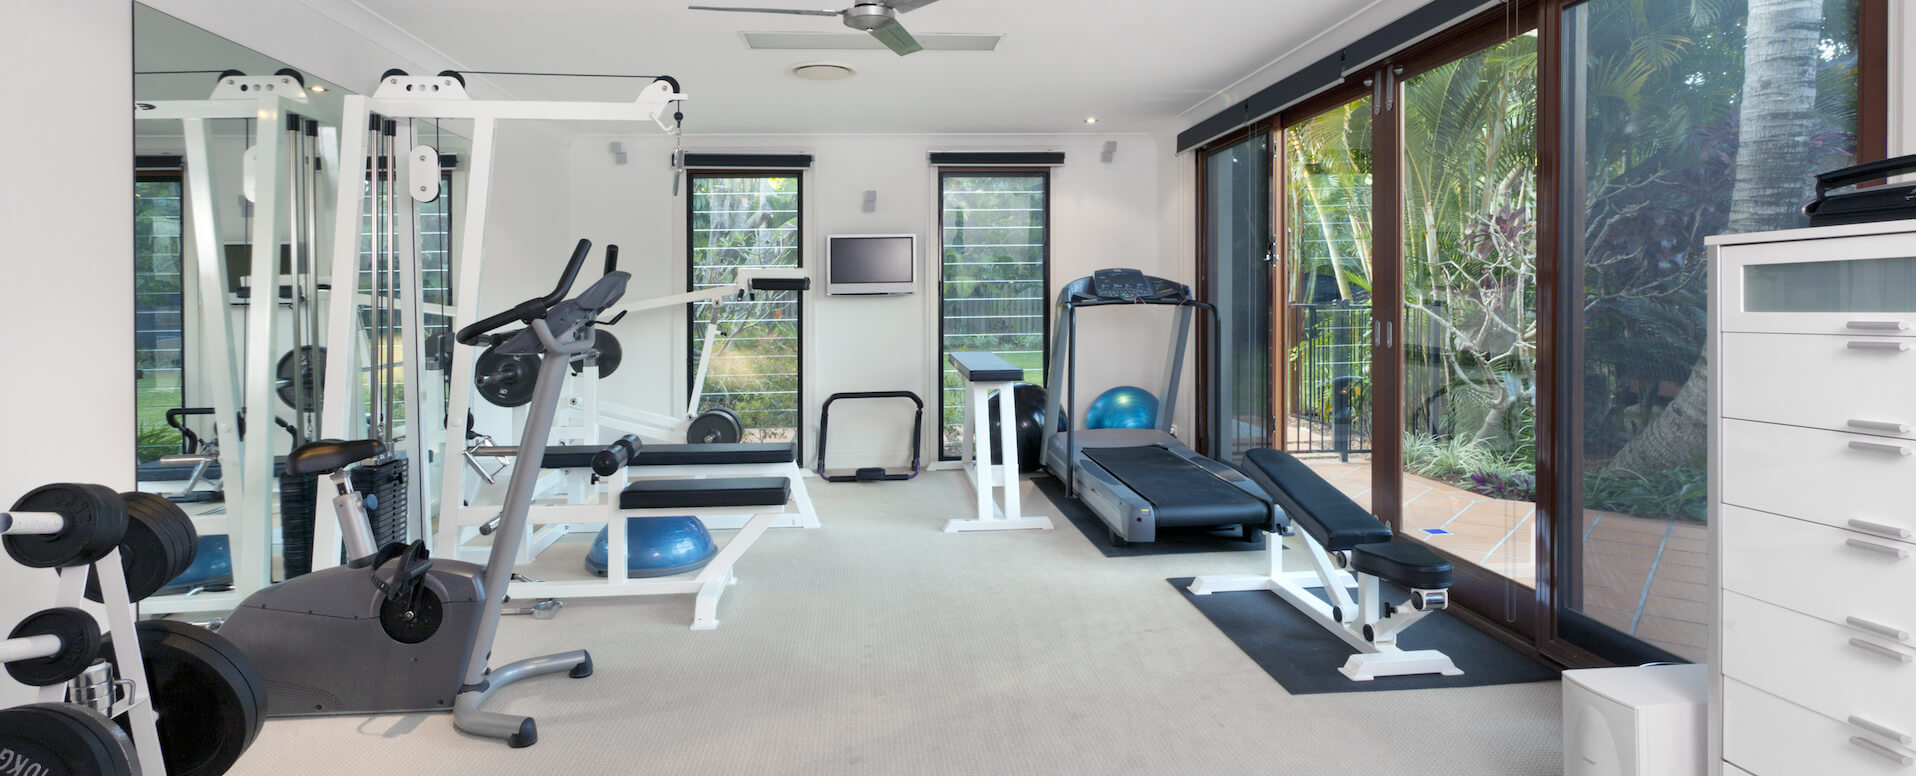 Why_rent_a_luxury_property_with_a_gym?_A_stay_centered_on_your_well-being